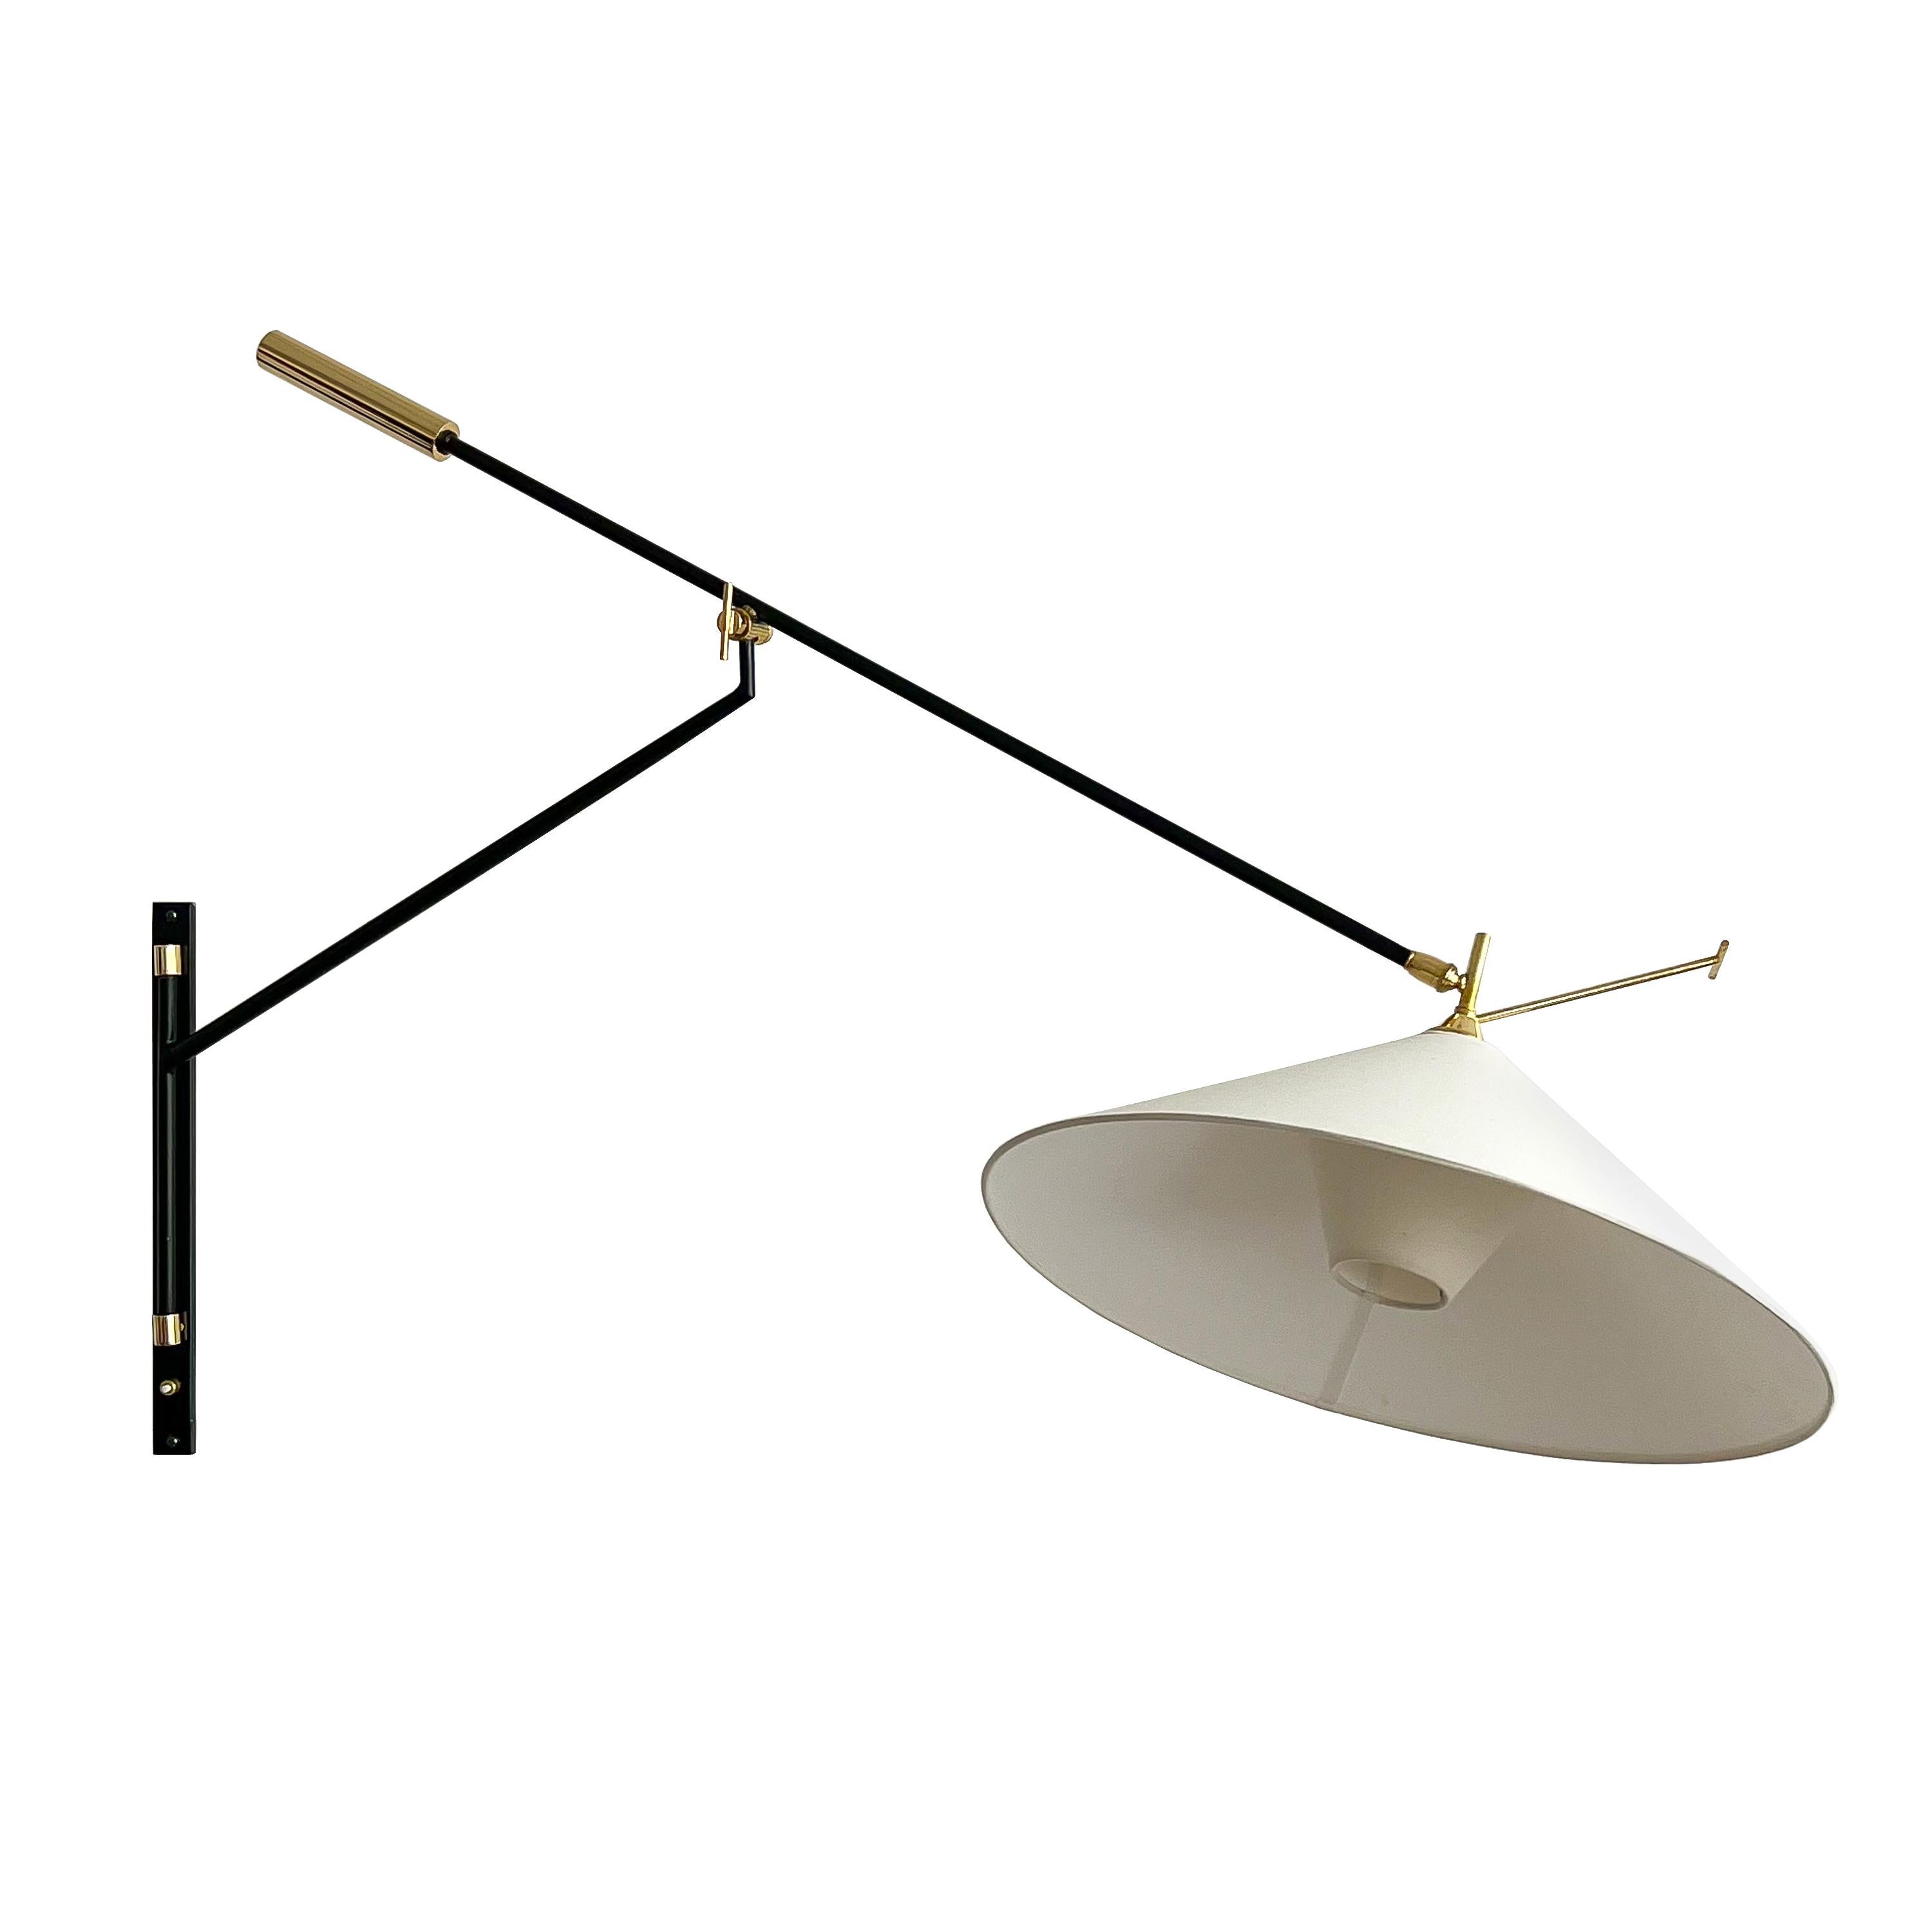 French 1950s swing arm articulating wall sconces by Maison Lunel. Only one is currently available, priced individually. Large wall mounted sconces in black lacquered metal, brass and newly fabricated linen shades. Cylindrical solid brass weighted